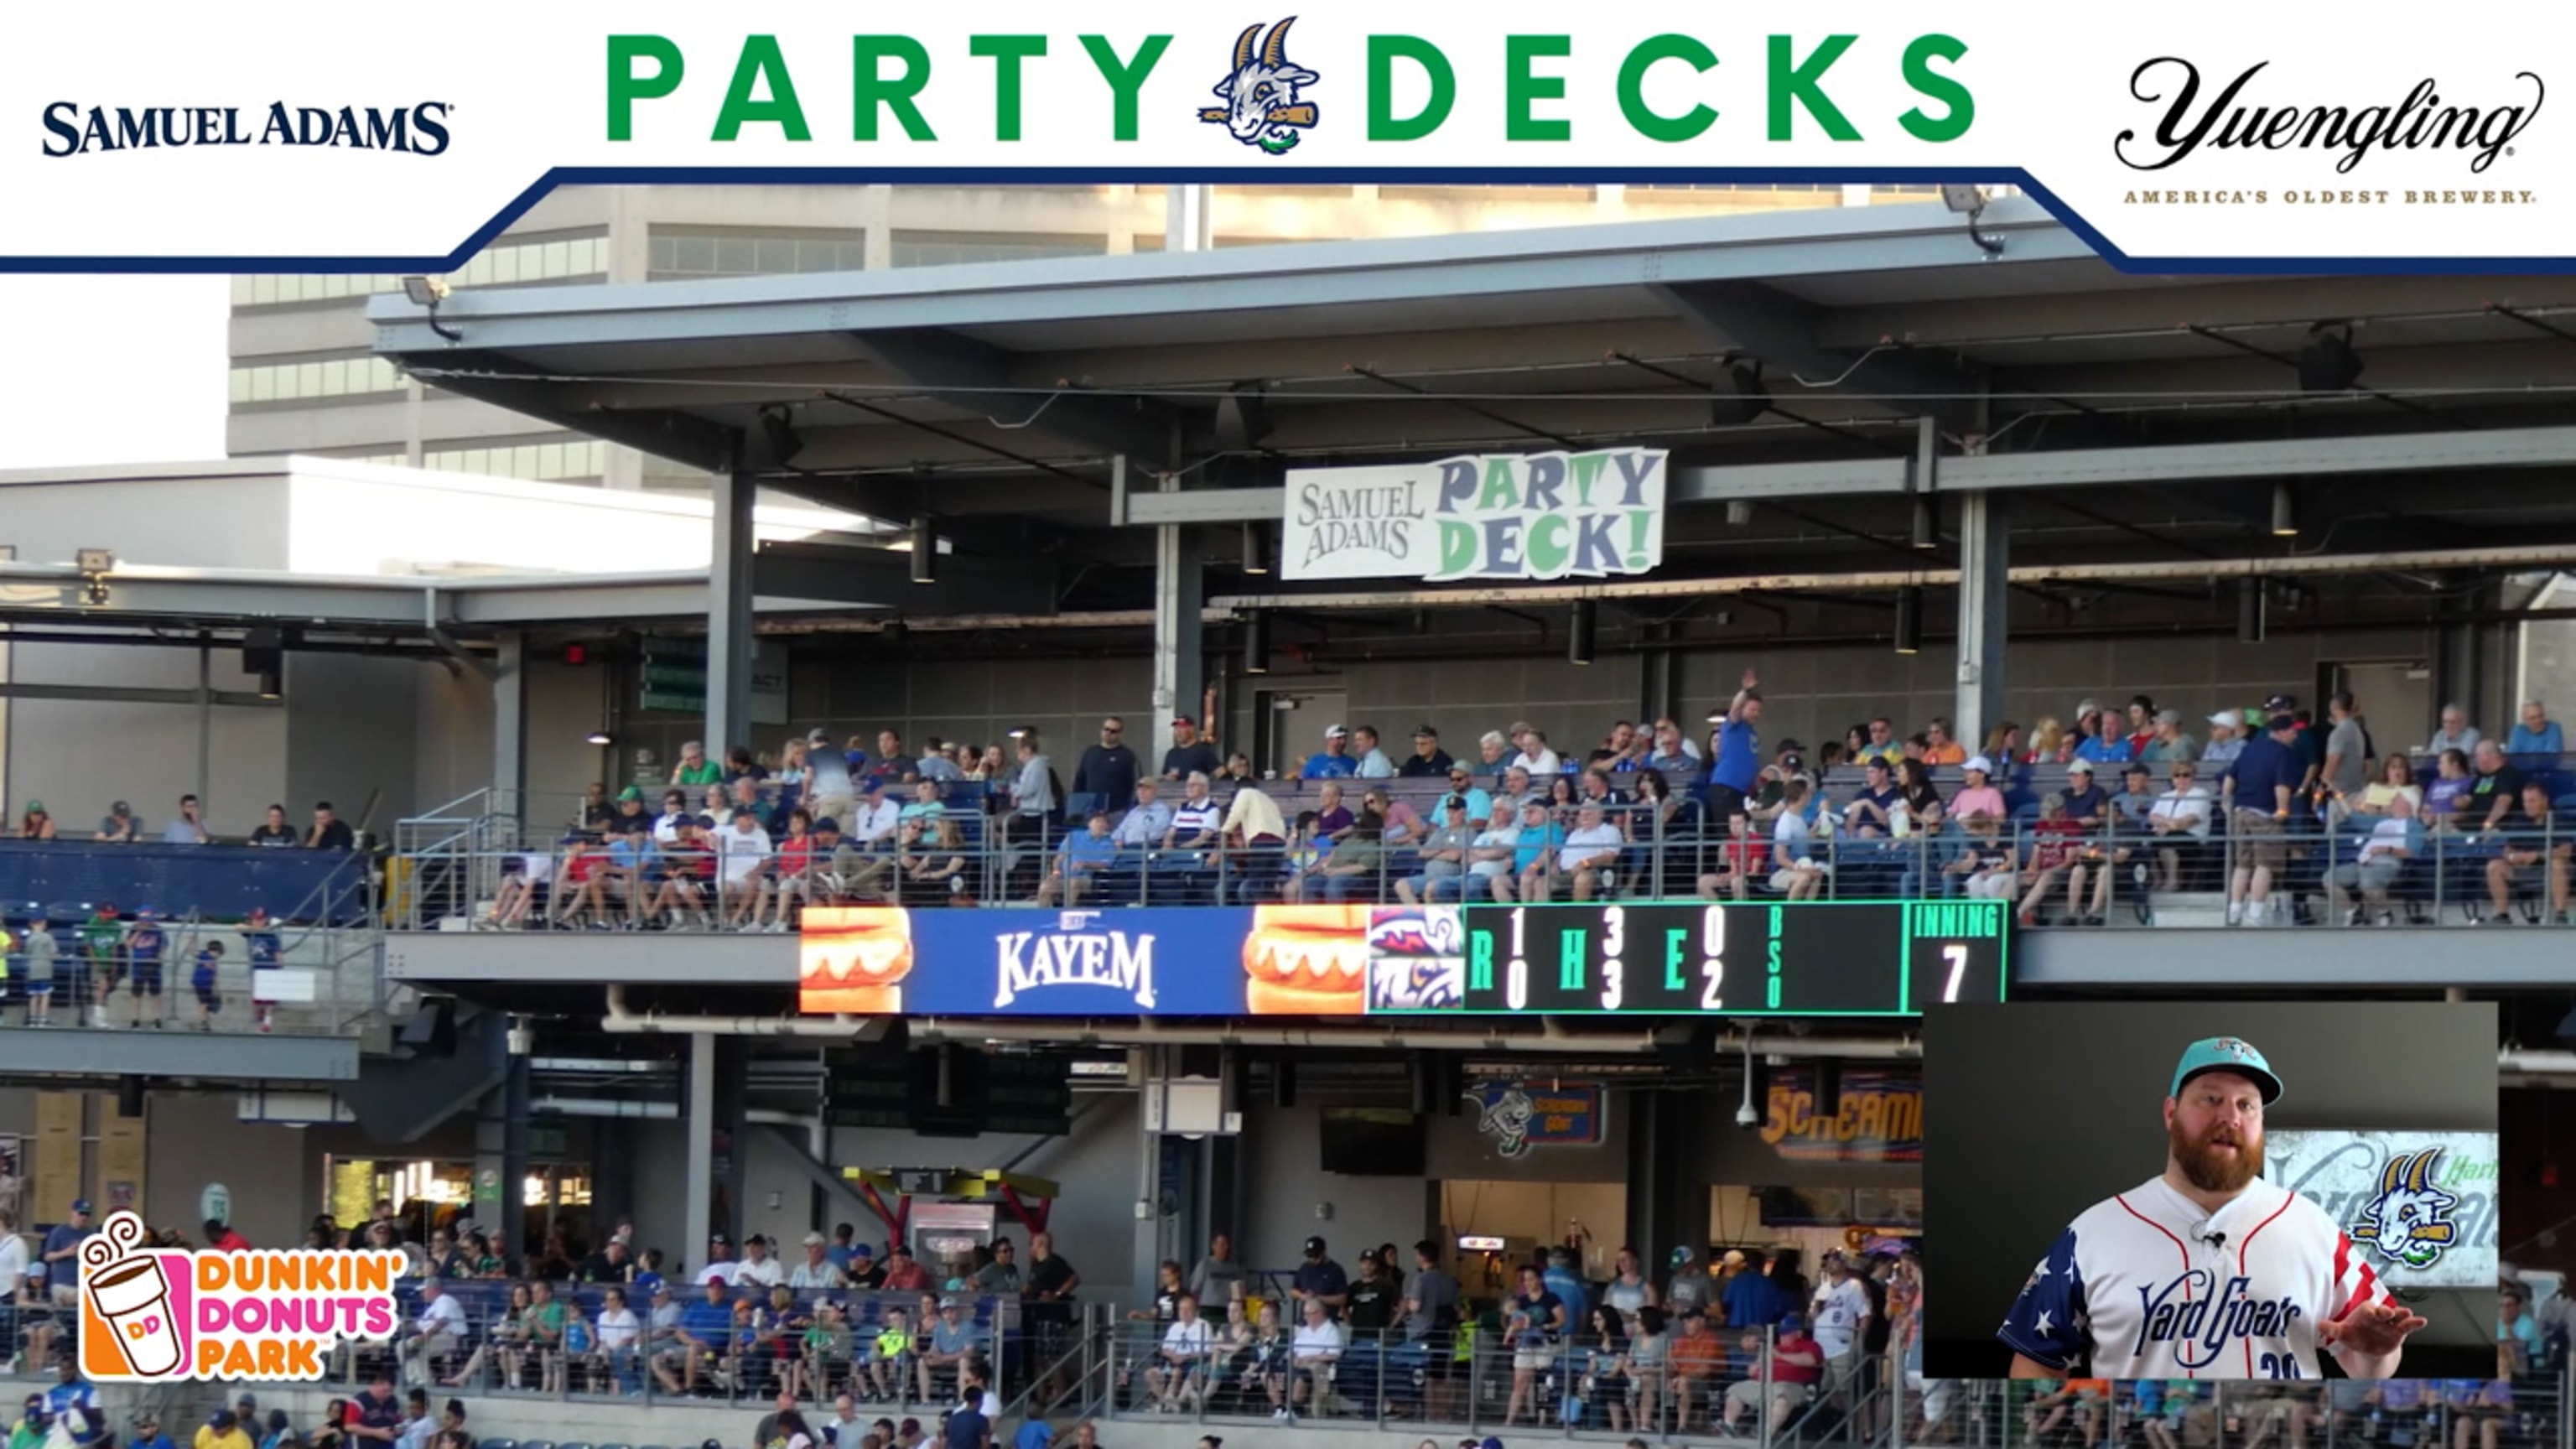 Yard Goats Announce Theme Nights for 2023 Home Games – NBC Connecticut